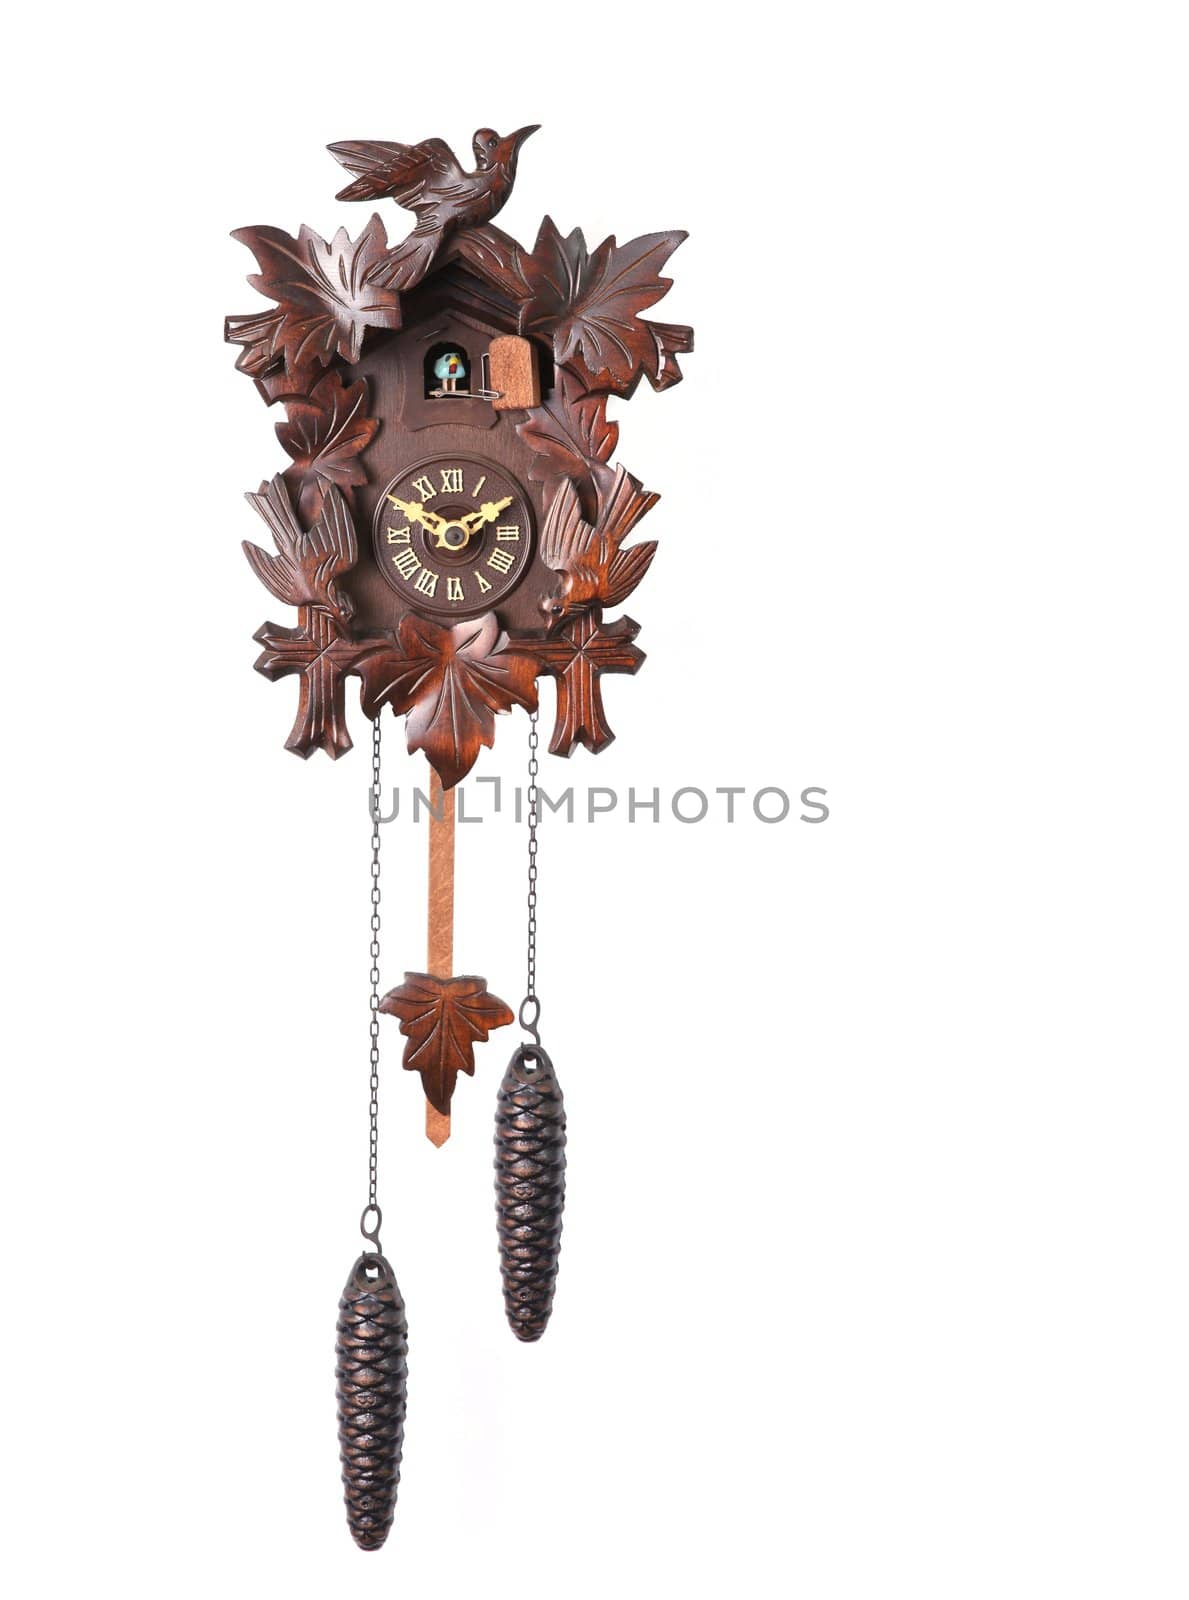 Cuckoo Clock Isolated on a White Background With Hanging Weights